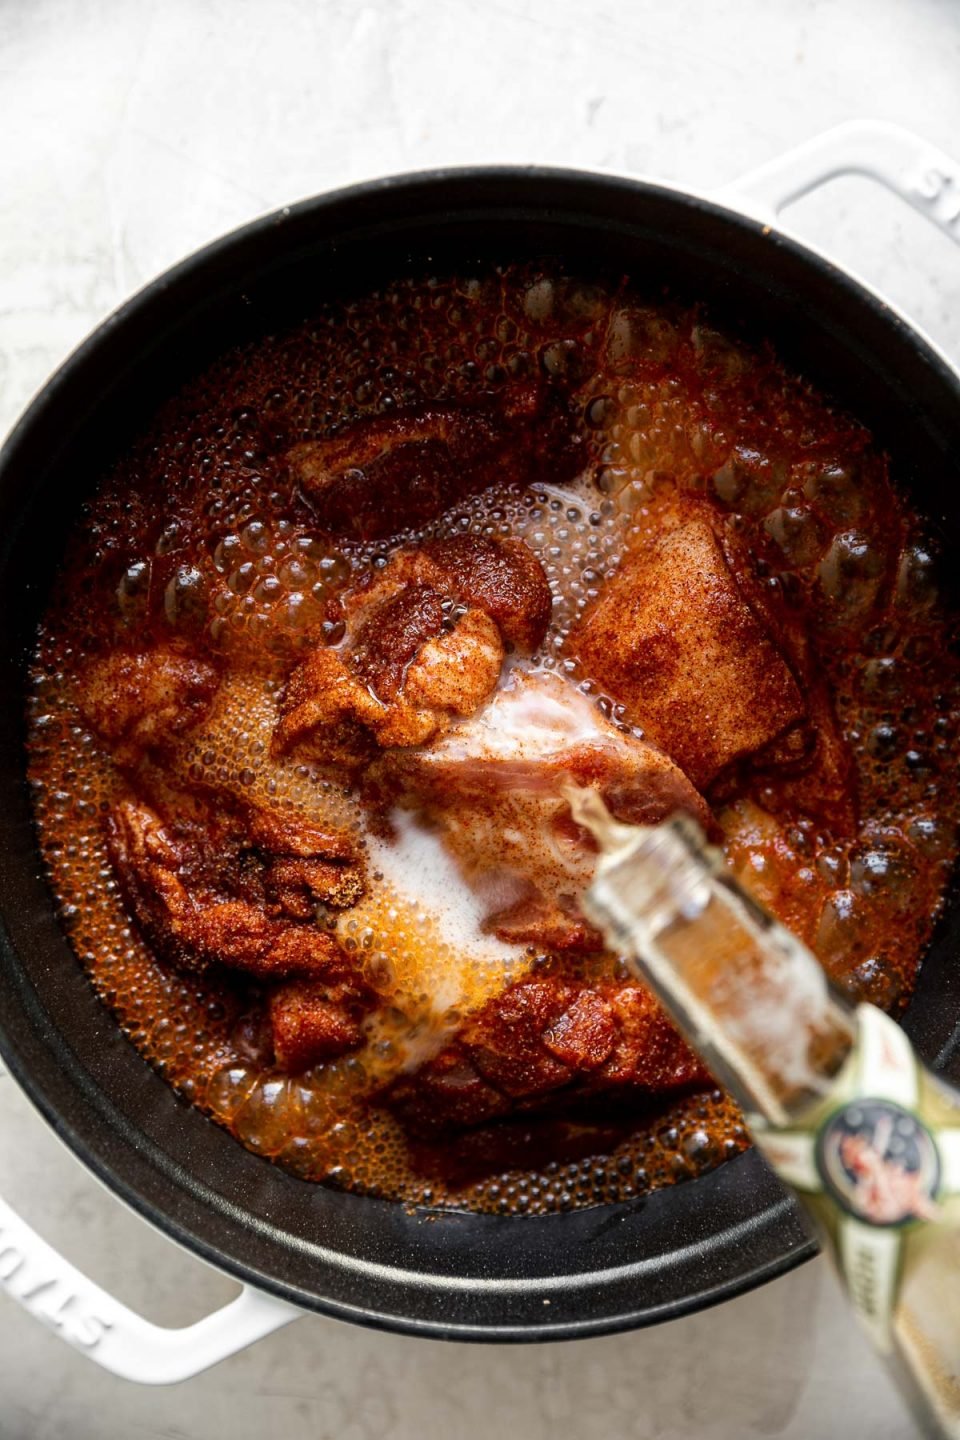 Seasoned pork shown in large white dutch oven atop a creamy cement surface. A bottle of Miller High Life is shown pouring into the dutch oven, over the pork.